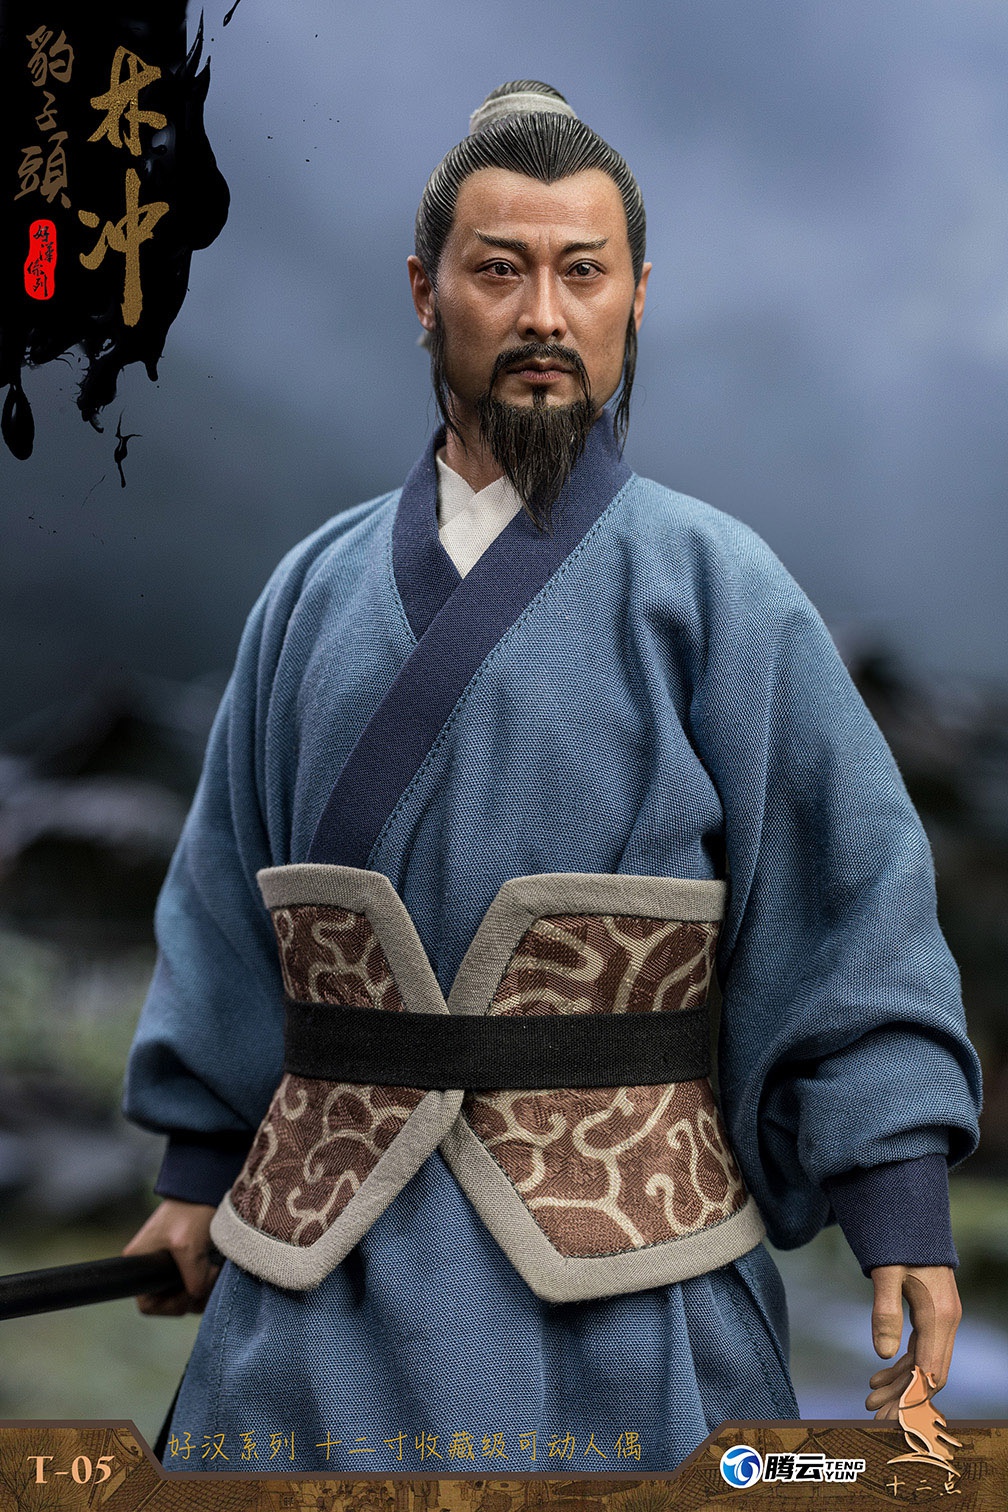 NEW PRODUCT: Twelve - Hero Series - Leopard Head Lin Chong Fengxue Mountain Temple Action Figure (T-05 /T-06) 02119